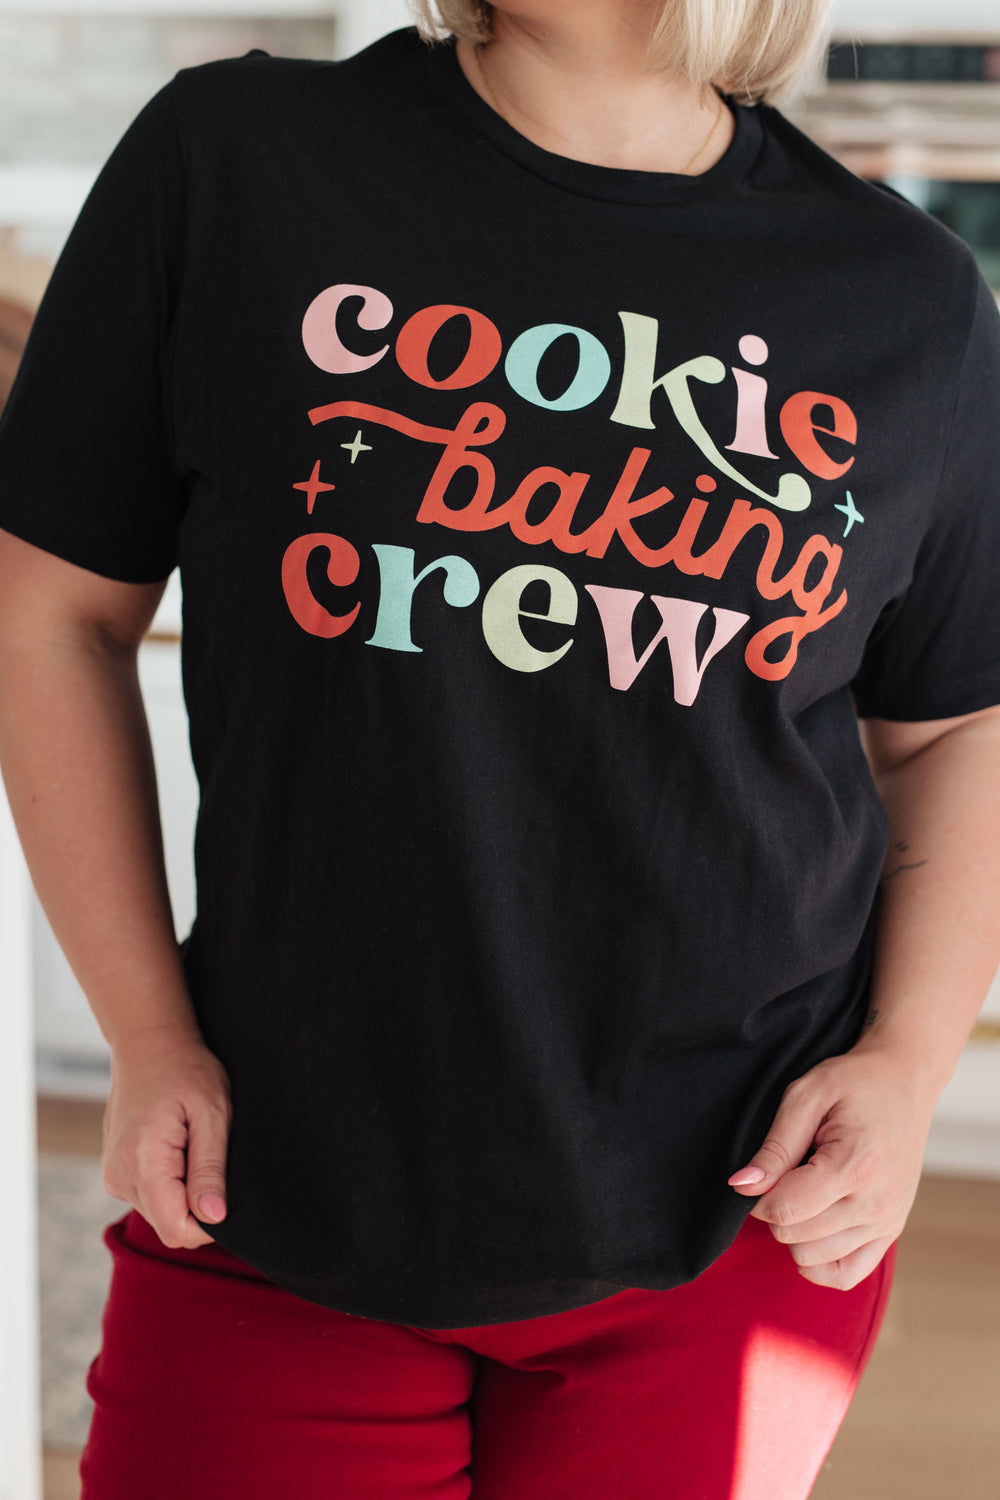 Womens - Cookie Baking Crew Graphic T